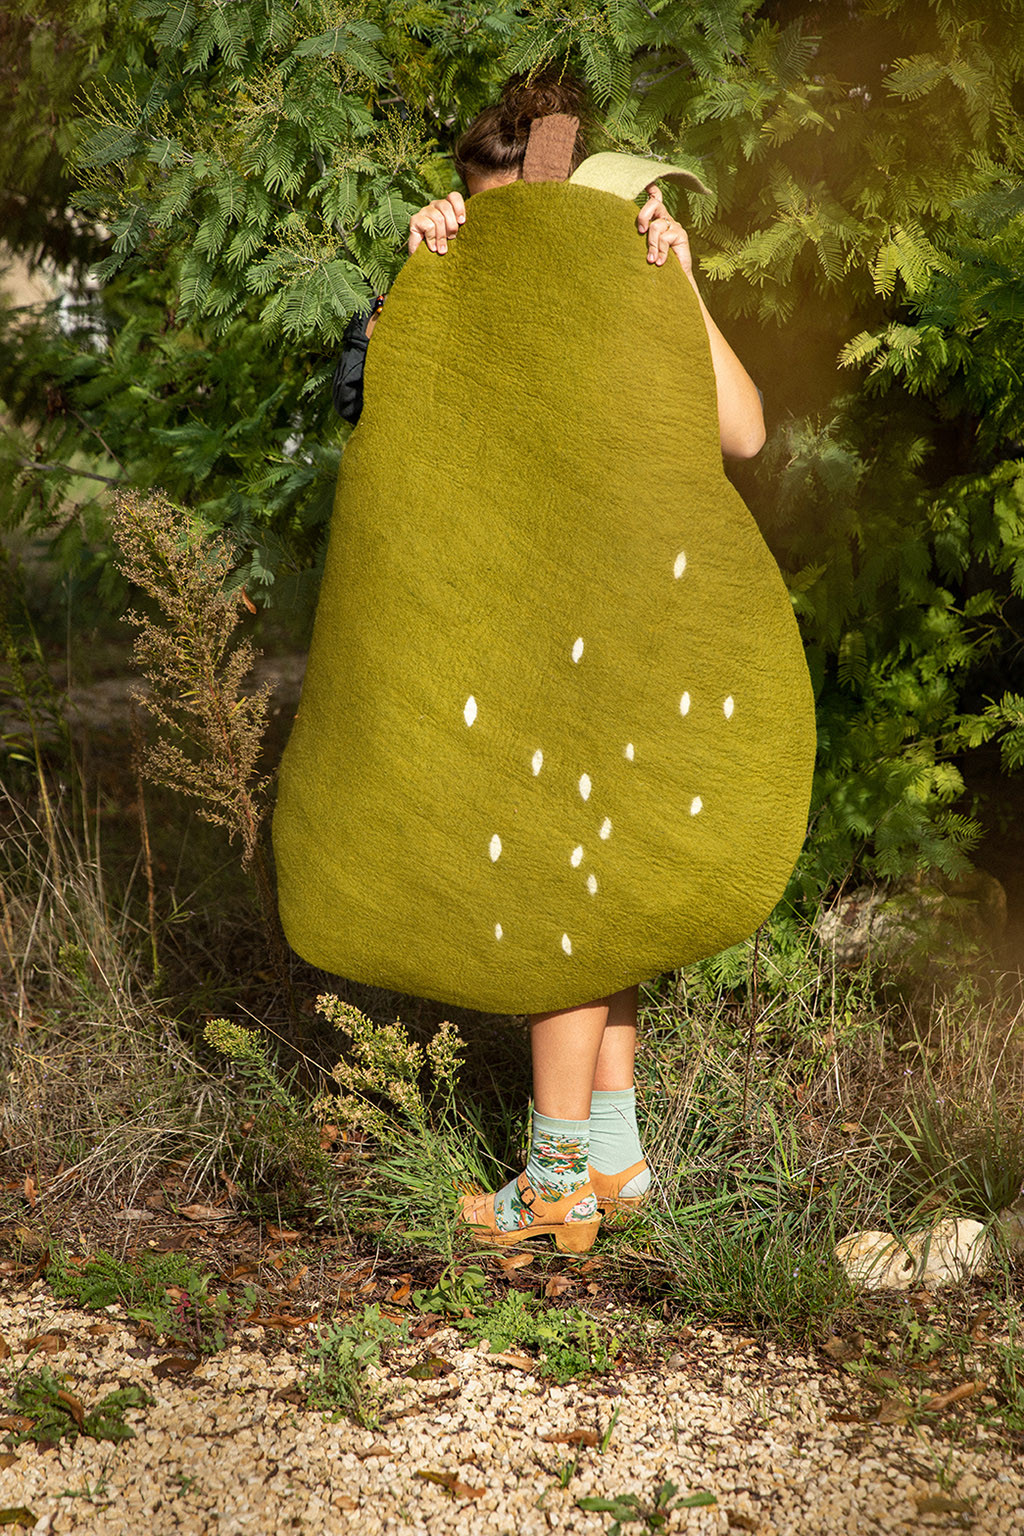 Felt green carpet for child in the shape of a pear carried by a woman